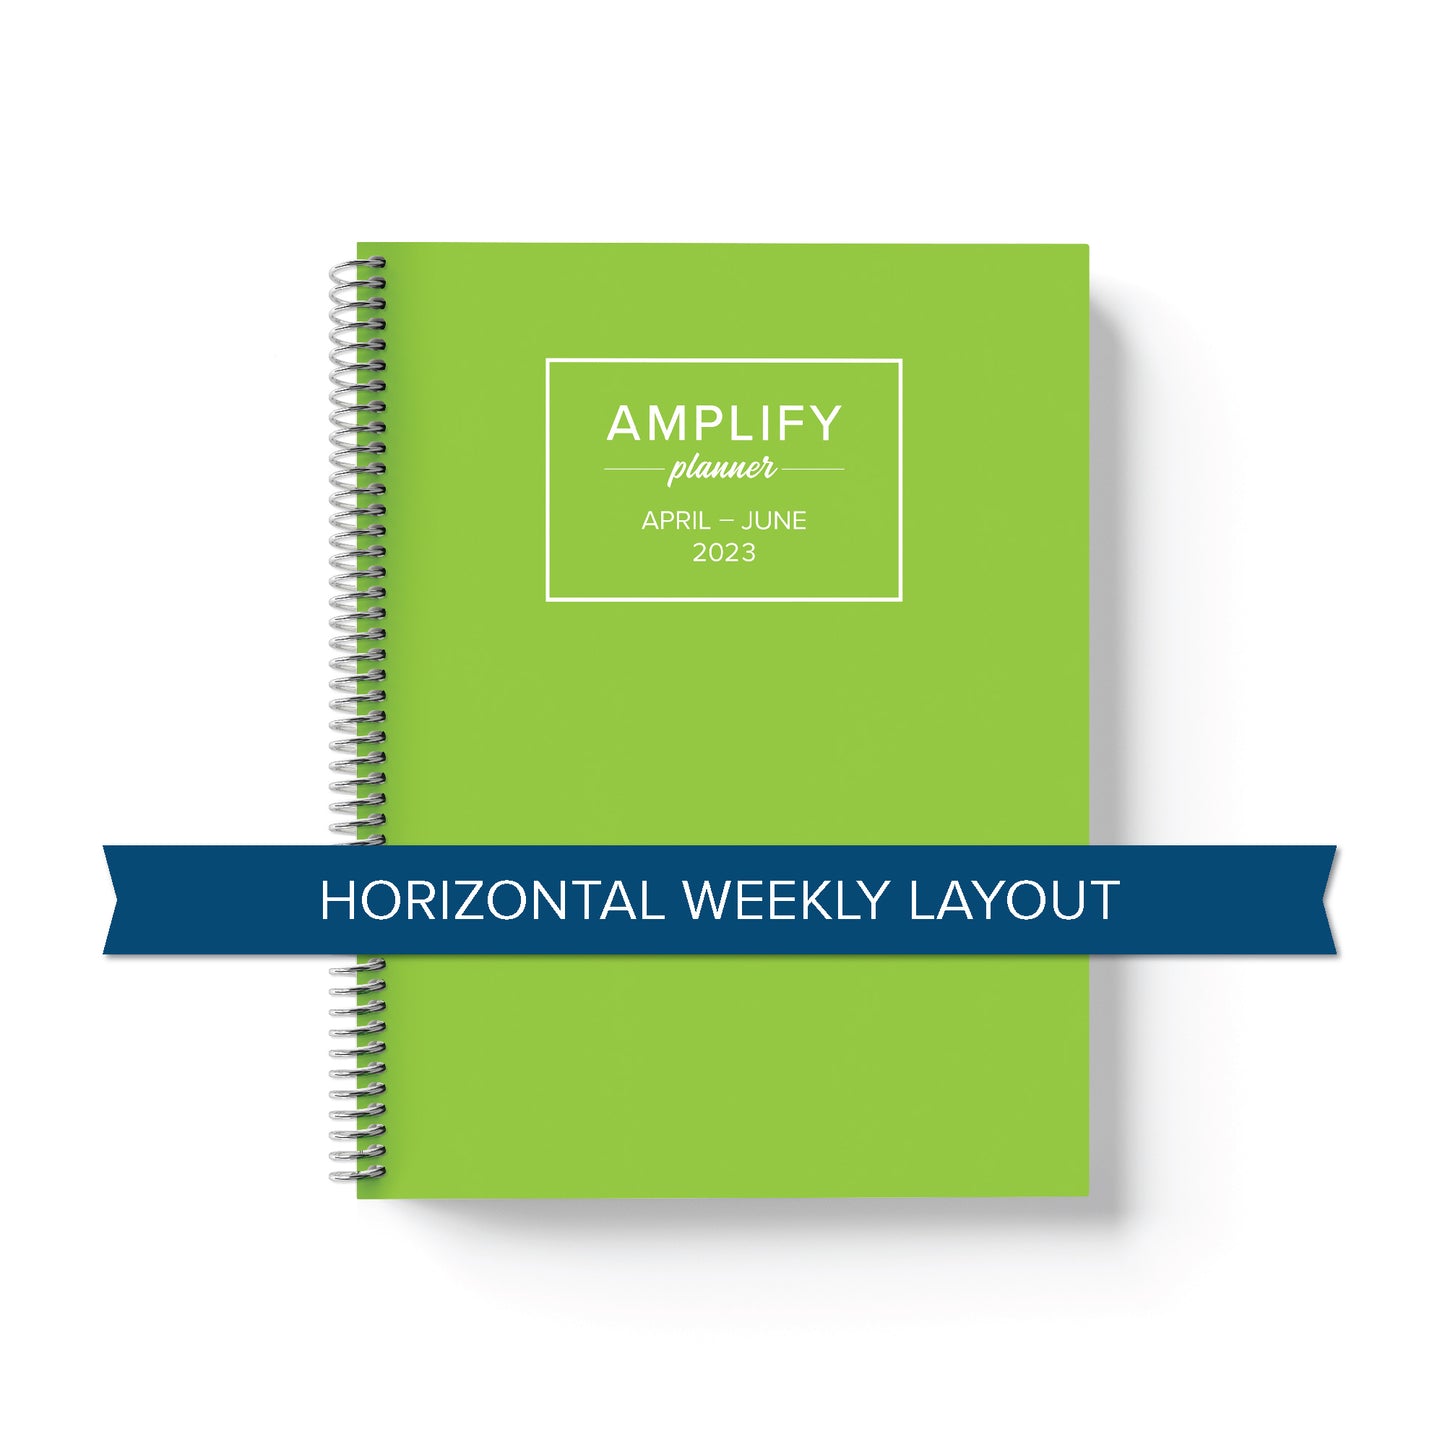 Outdated Quarterly Amplify Planner